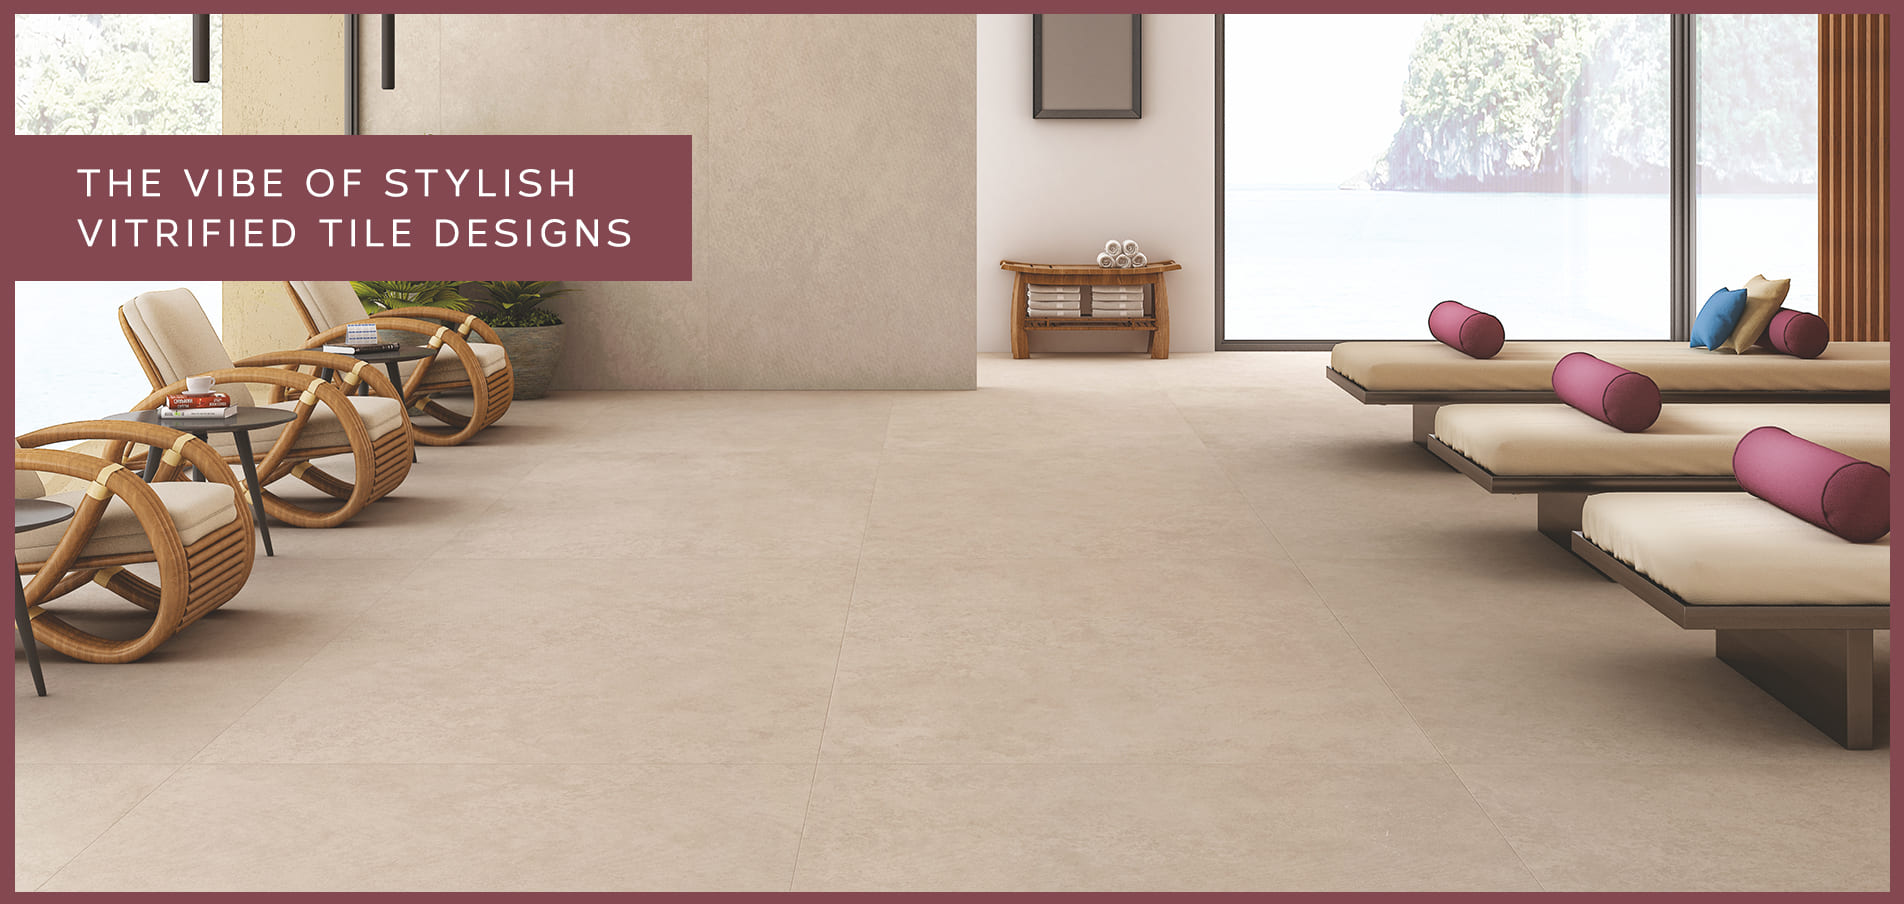 Feel the Vibe of Stylish Vitrified Tile Designs by Simpolo